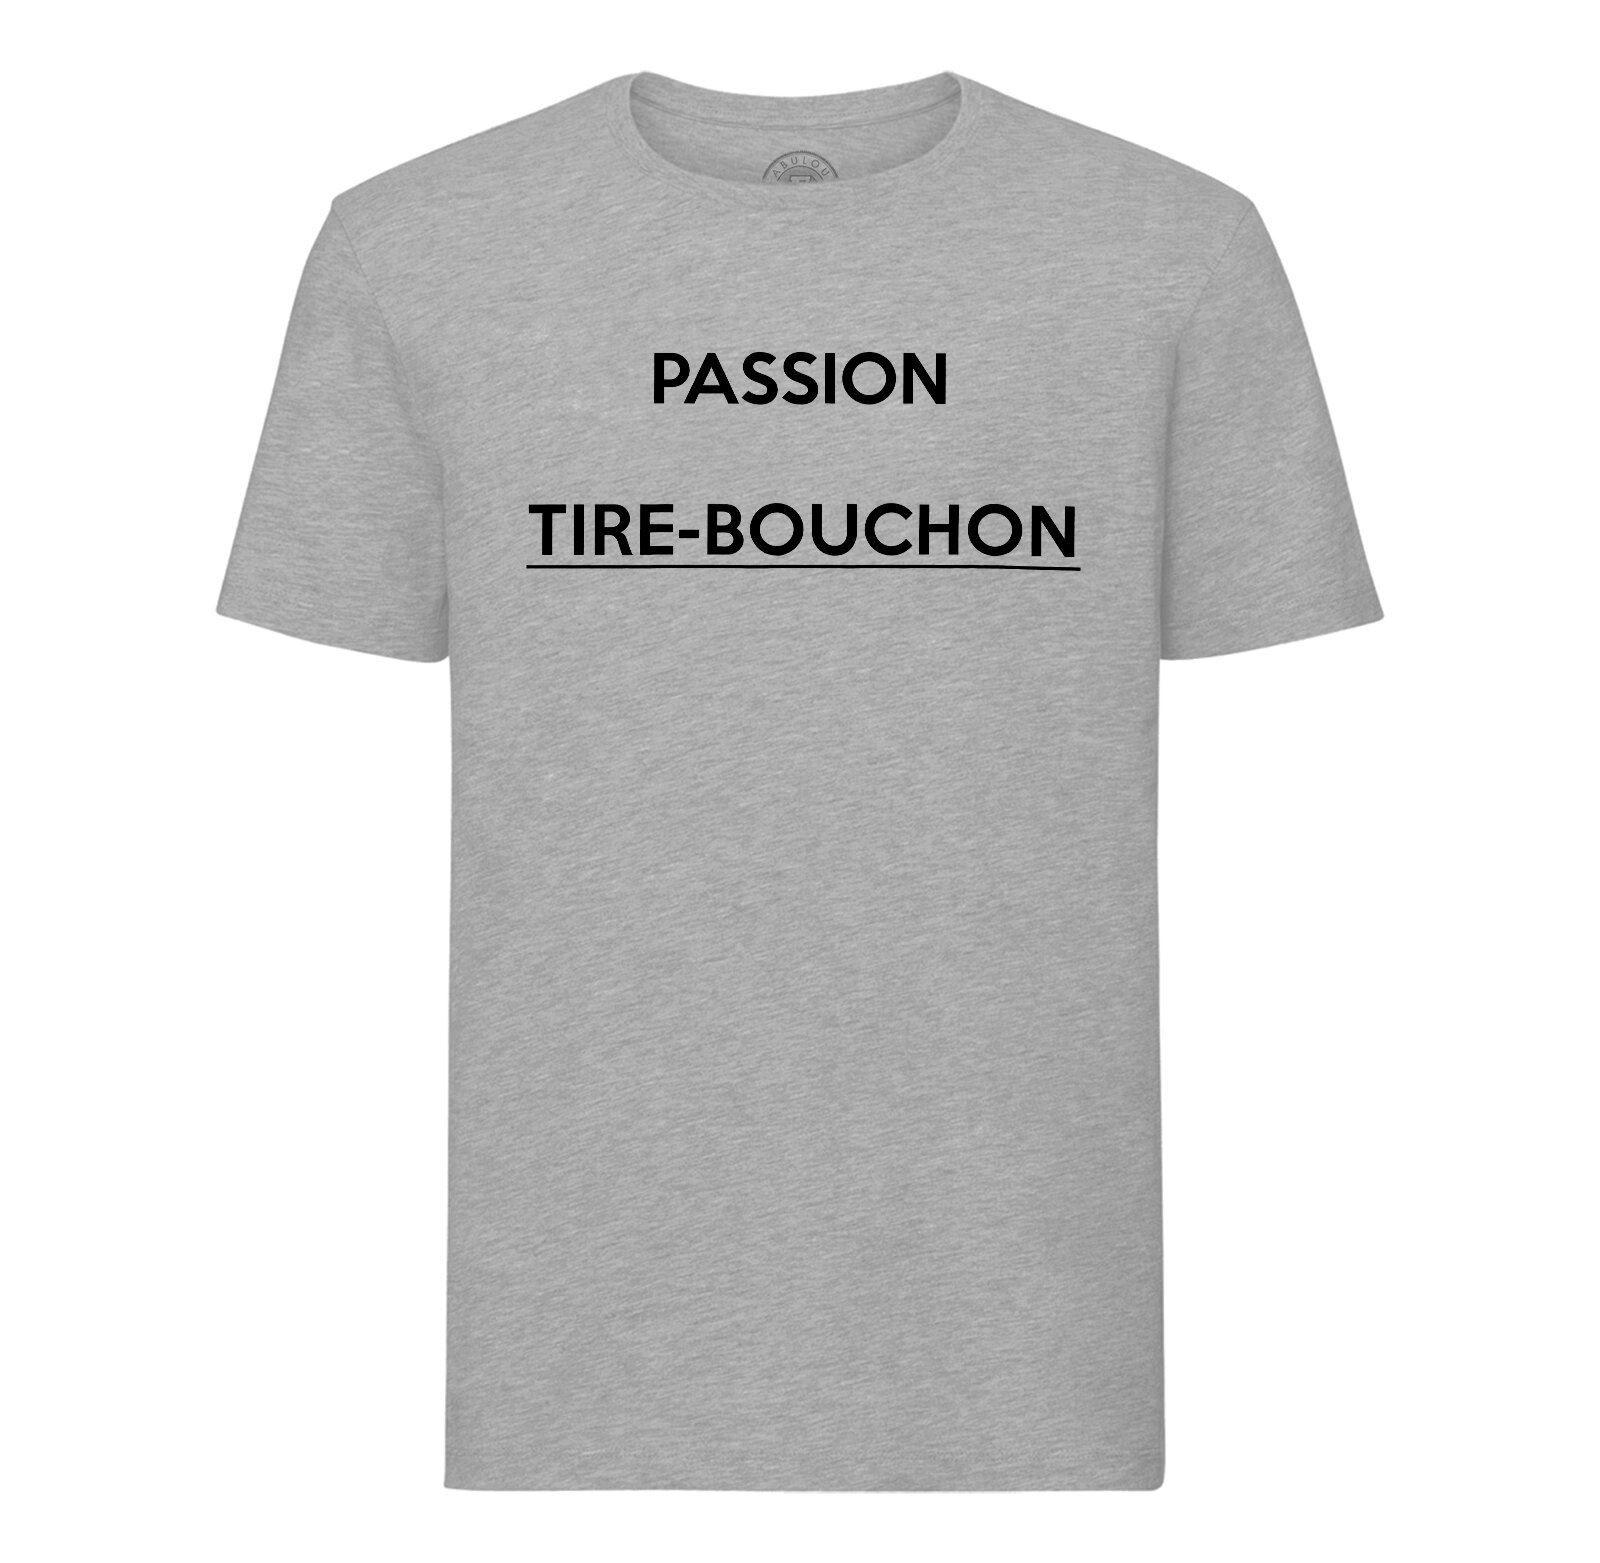 T-shirt Homme Col Rond Passion Tire Bouchon Humour Drole Alcool